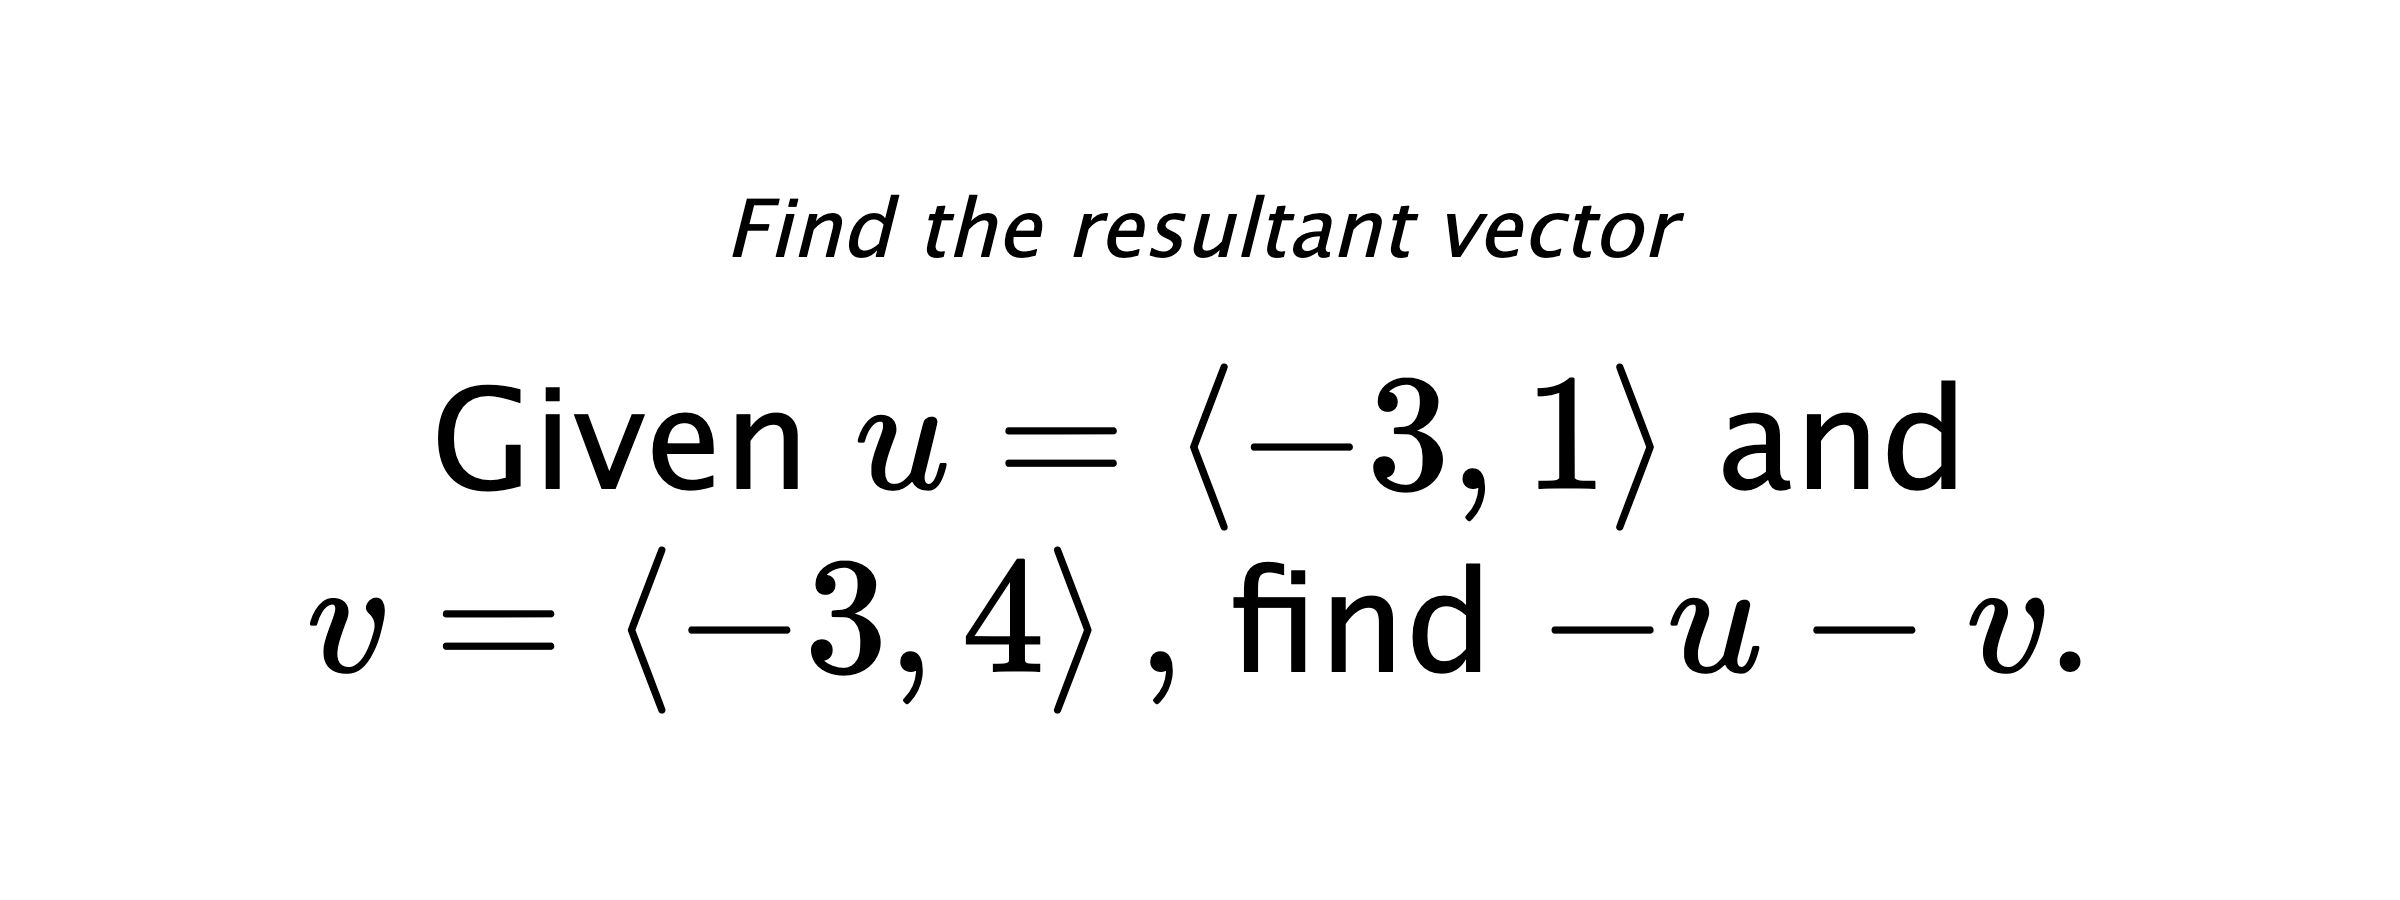 Find the resultant vector Given $ u = \left< -3,1 \right> $ and $ v = \left< -3,4 \right> ,$ find $ -u-v .$